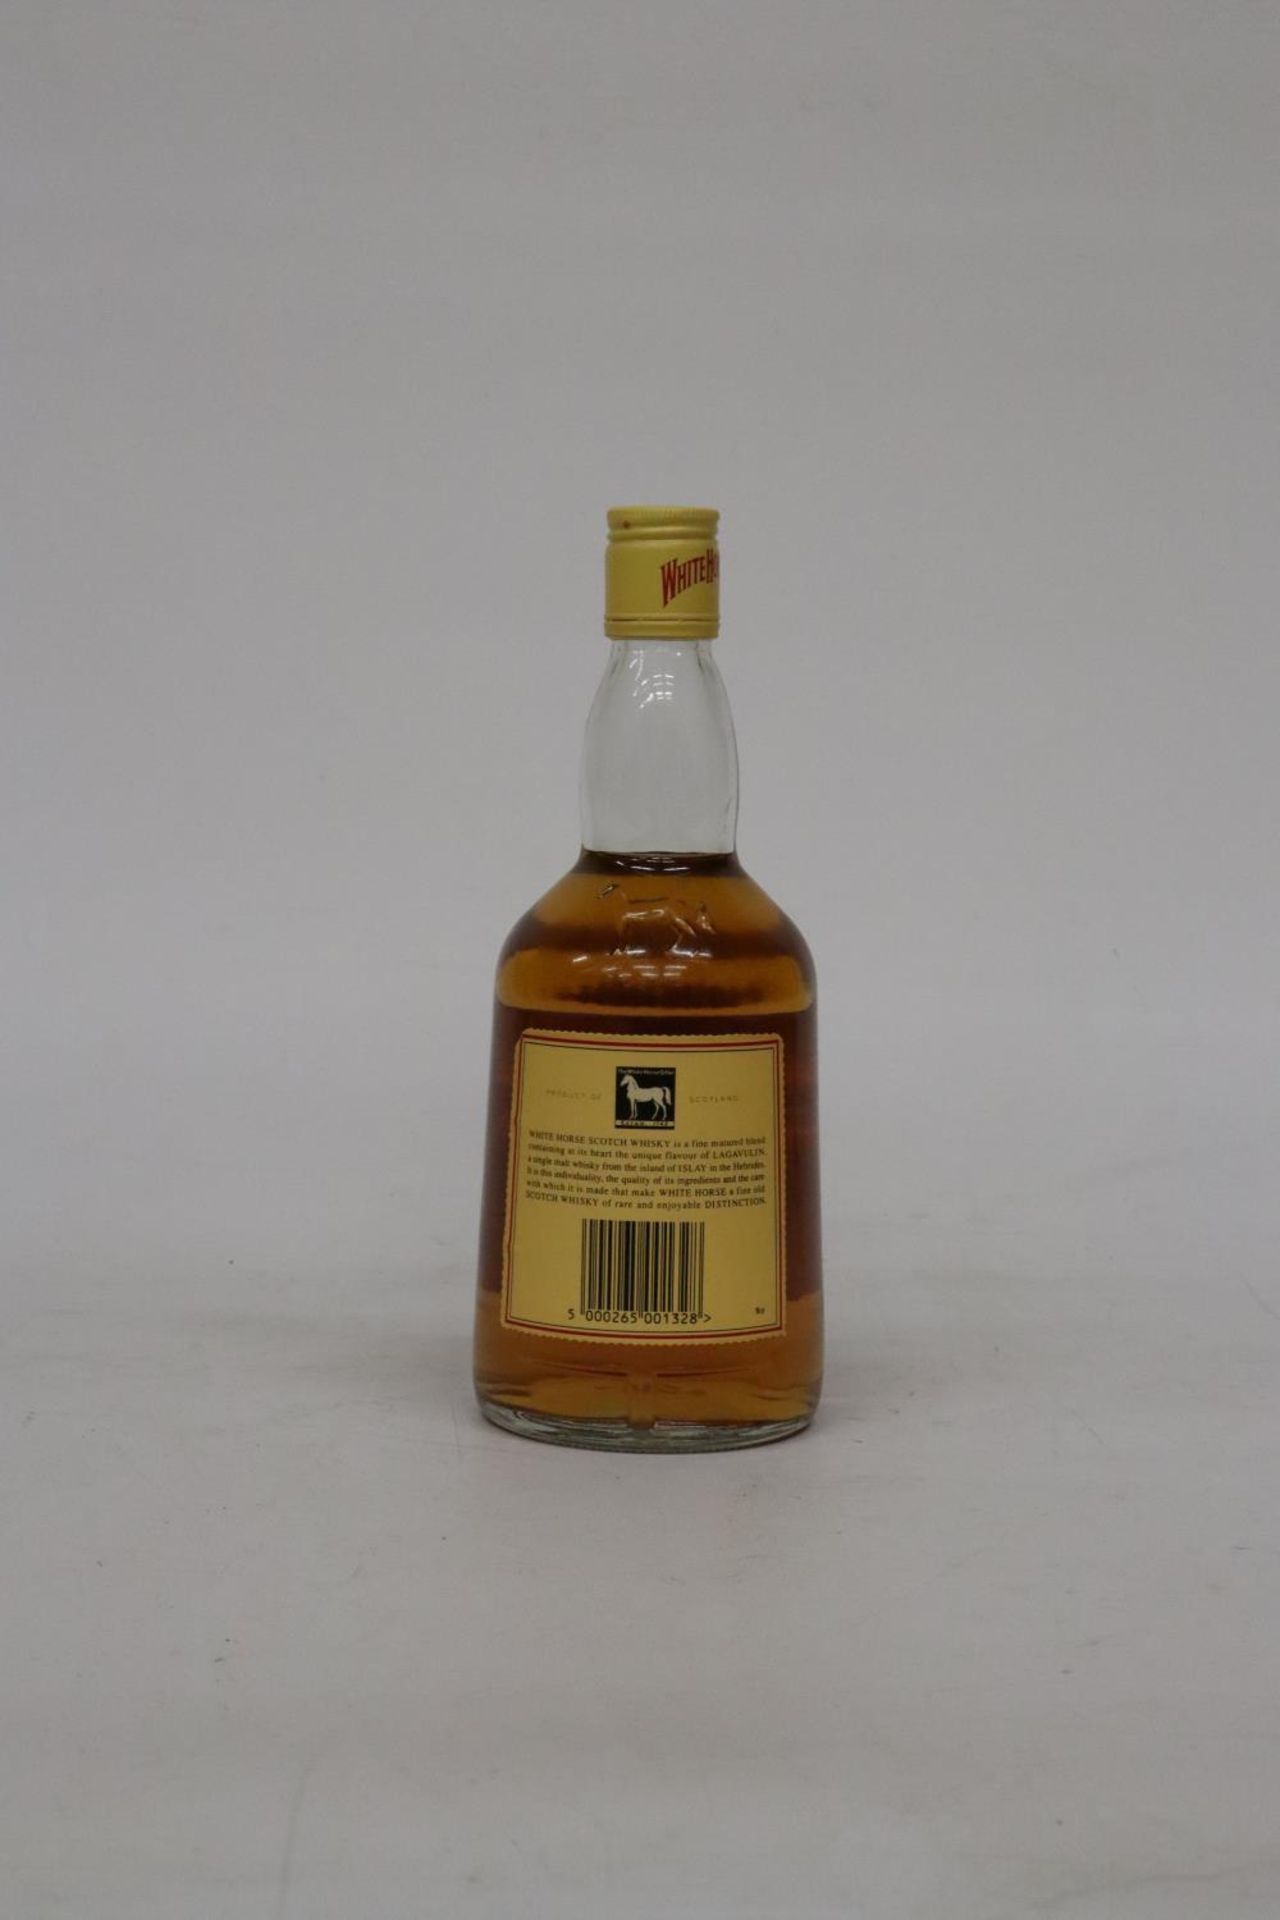 A 70CL BOTTLE OF WHITE HORSE FINE SCOTCH WHISKY - Image 3 of 3